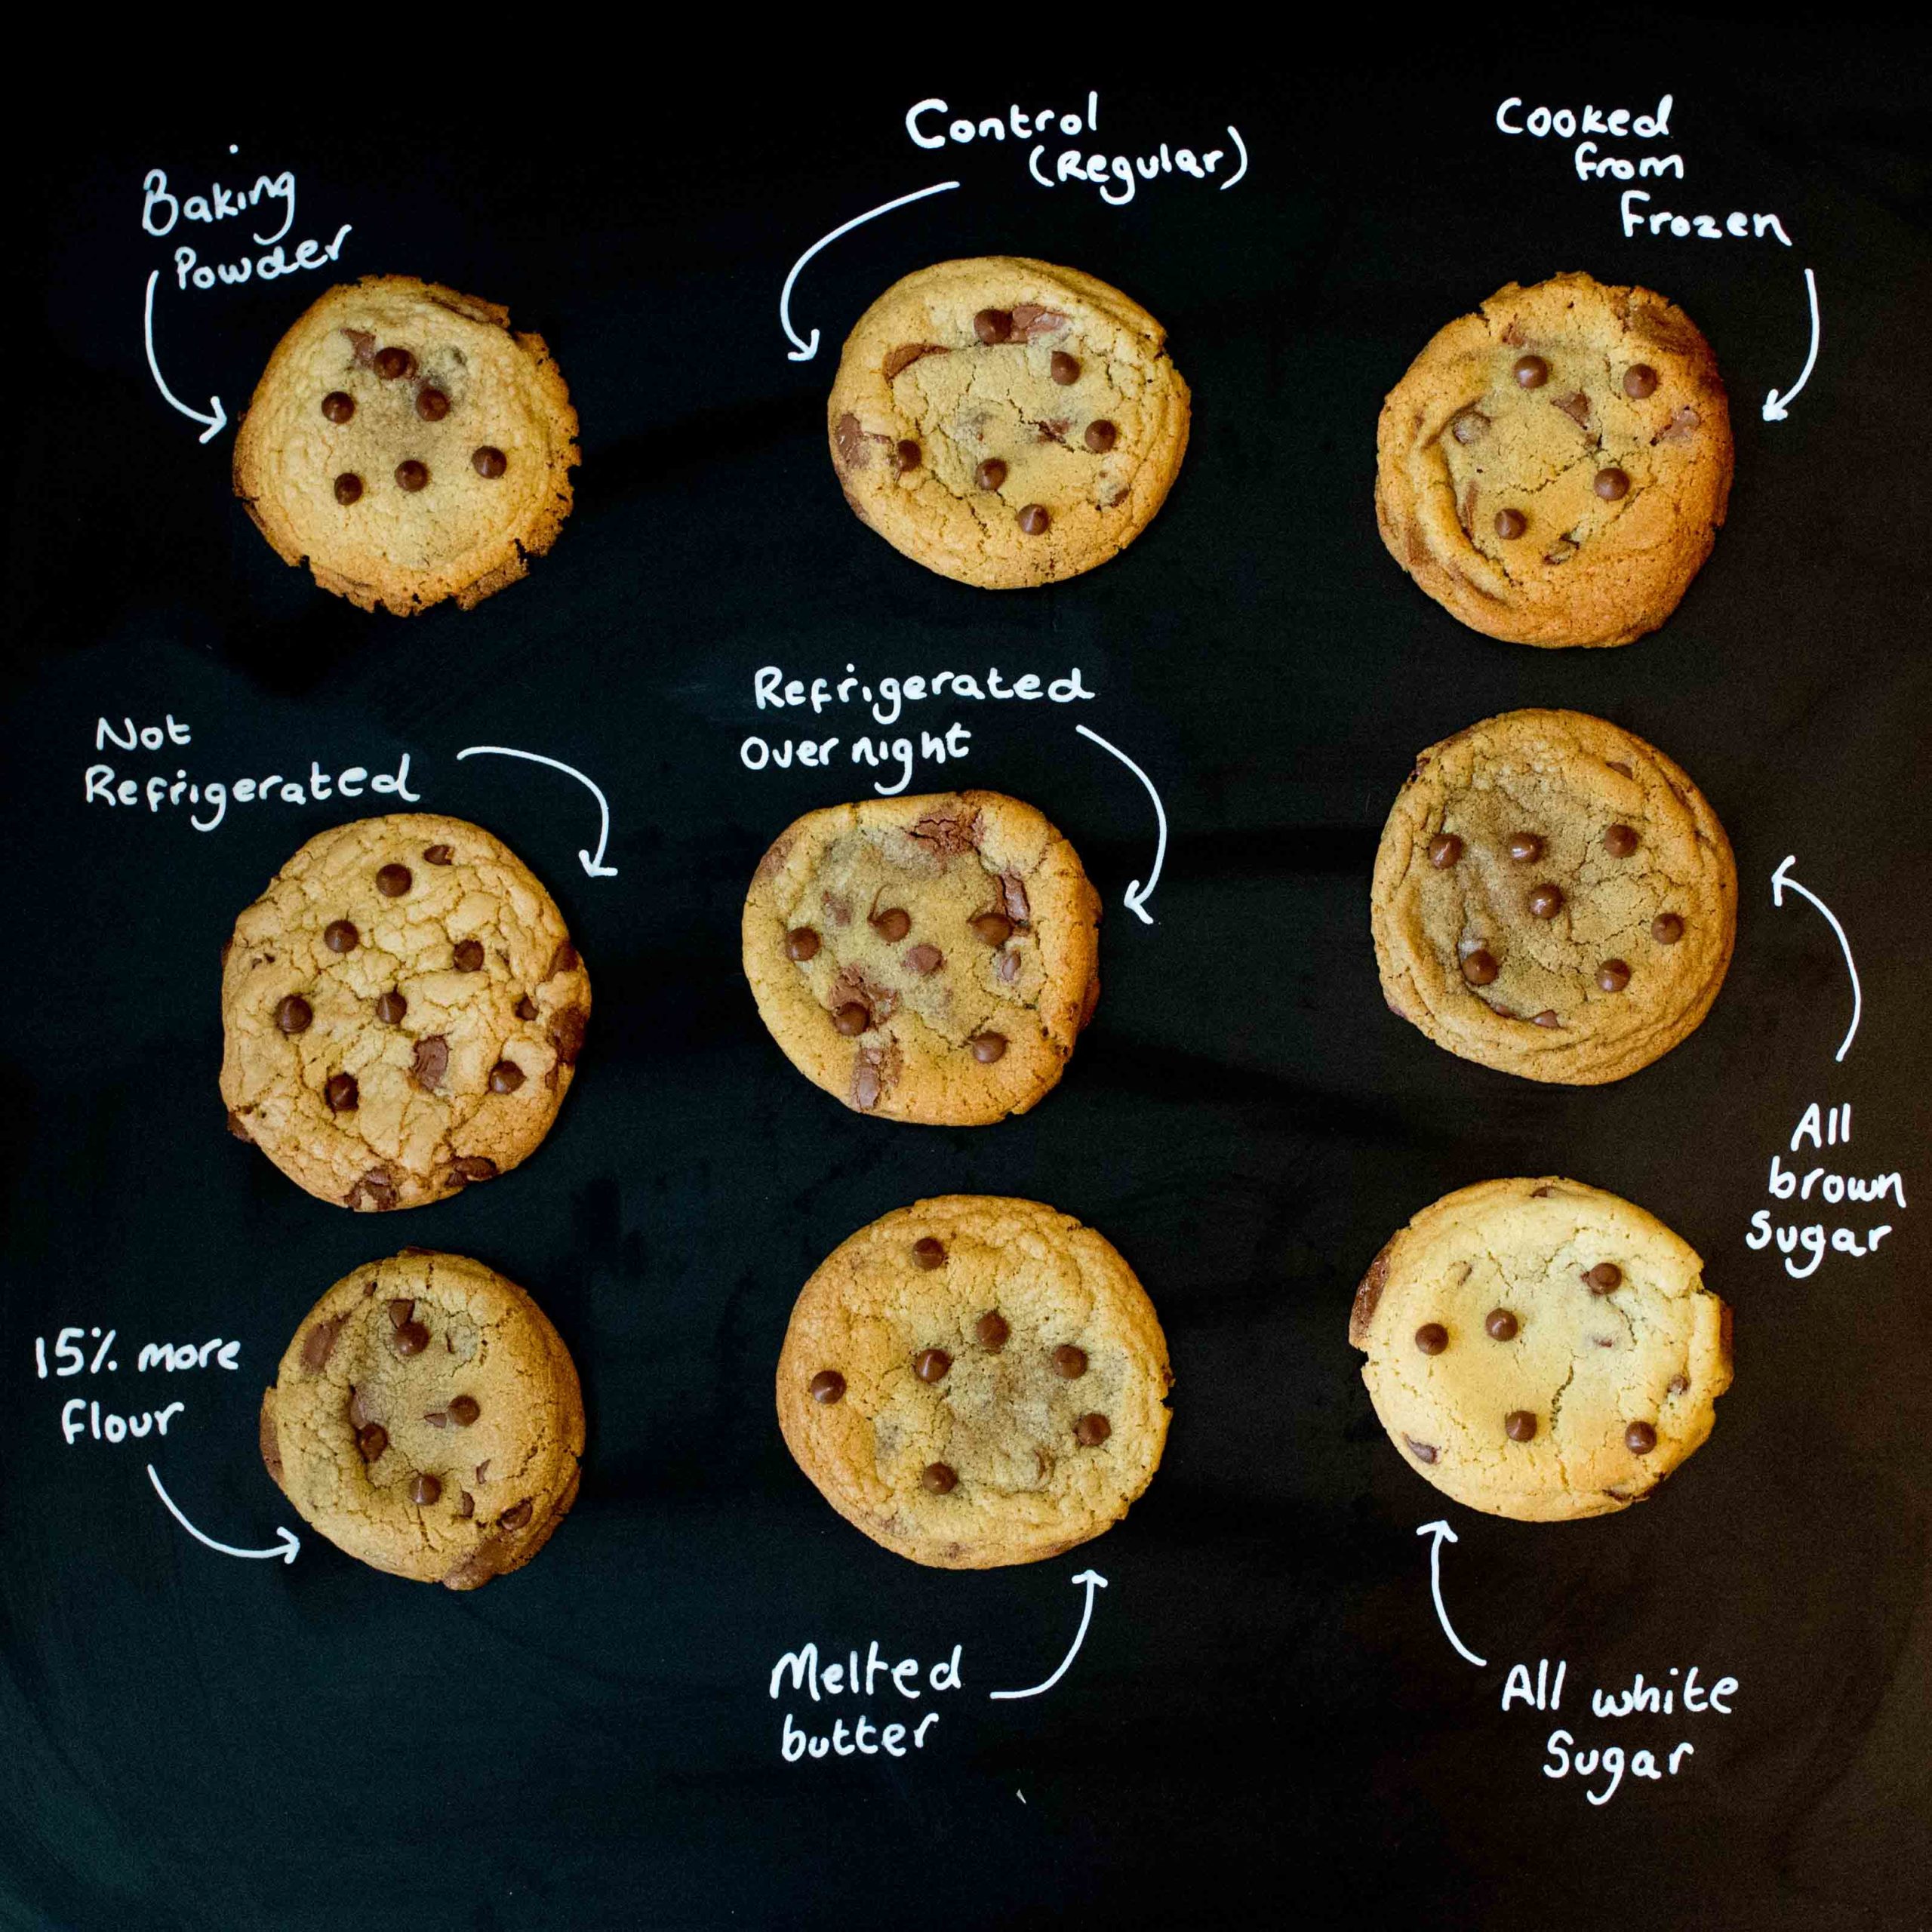 https://www.kitchensanctuary.com/wp-content/uploads/2014/07/Cookie-Experiment-scaled.jpg